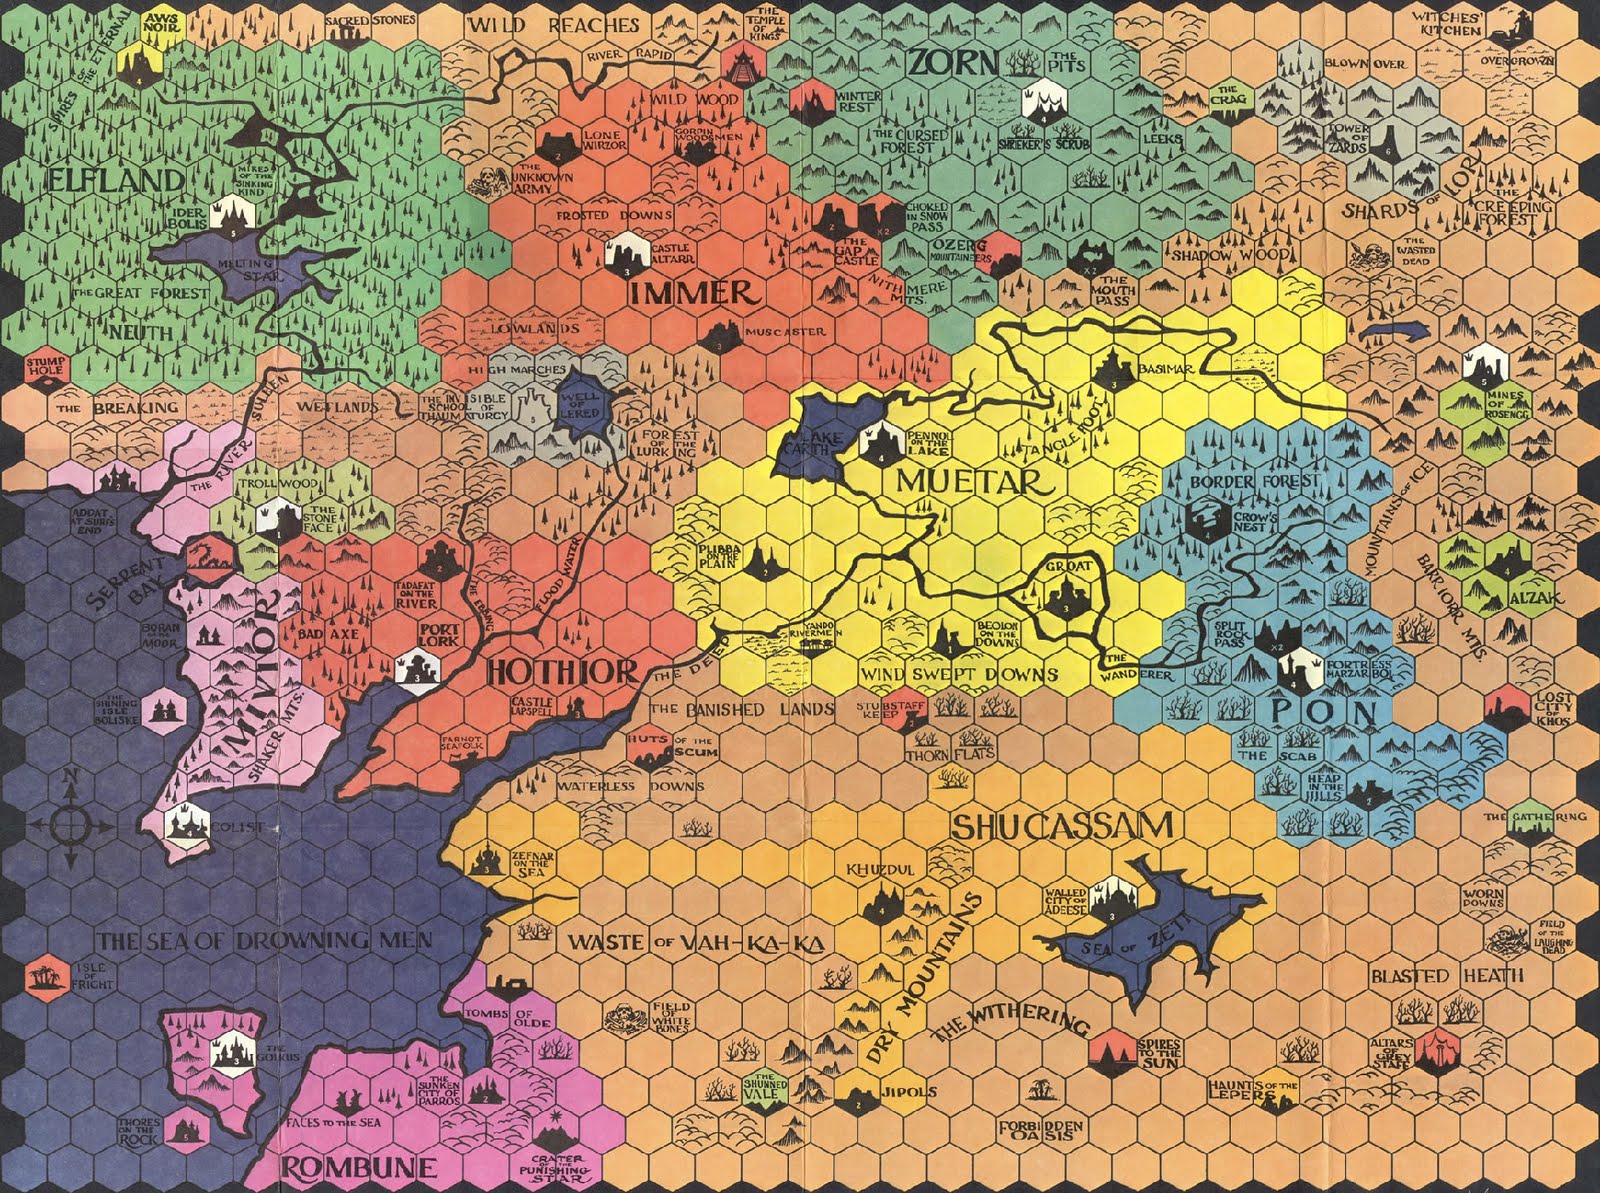 Minaria, as far as I’m concerned the best hexmap every made.